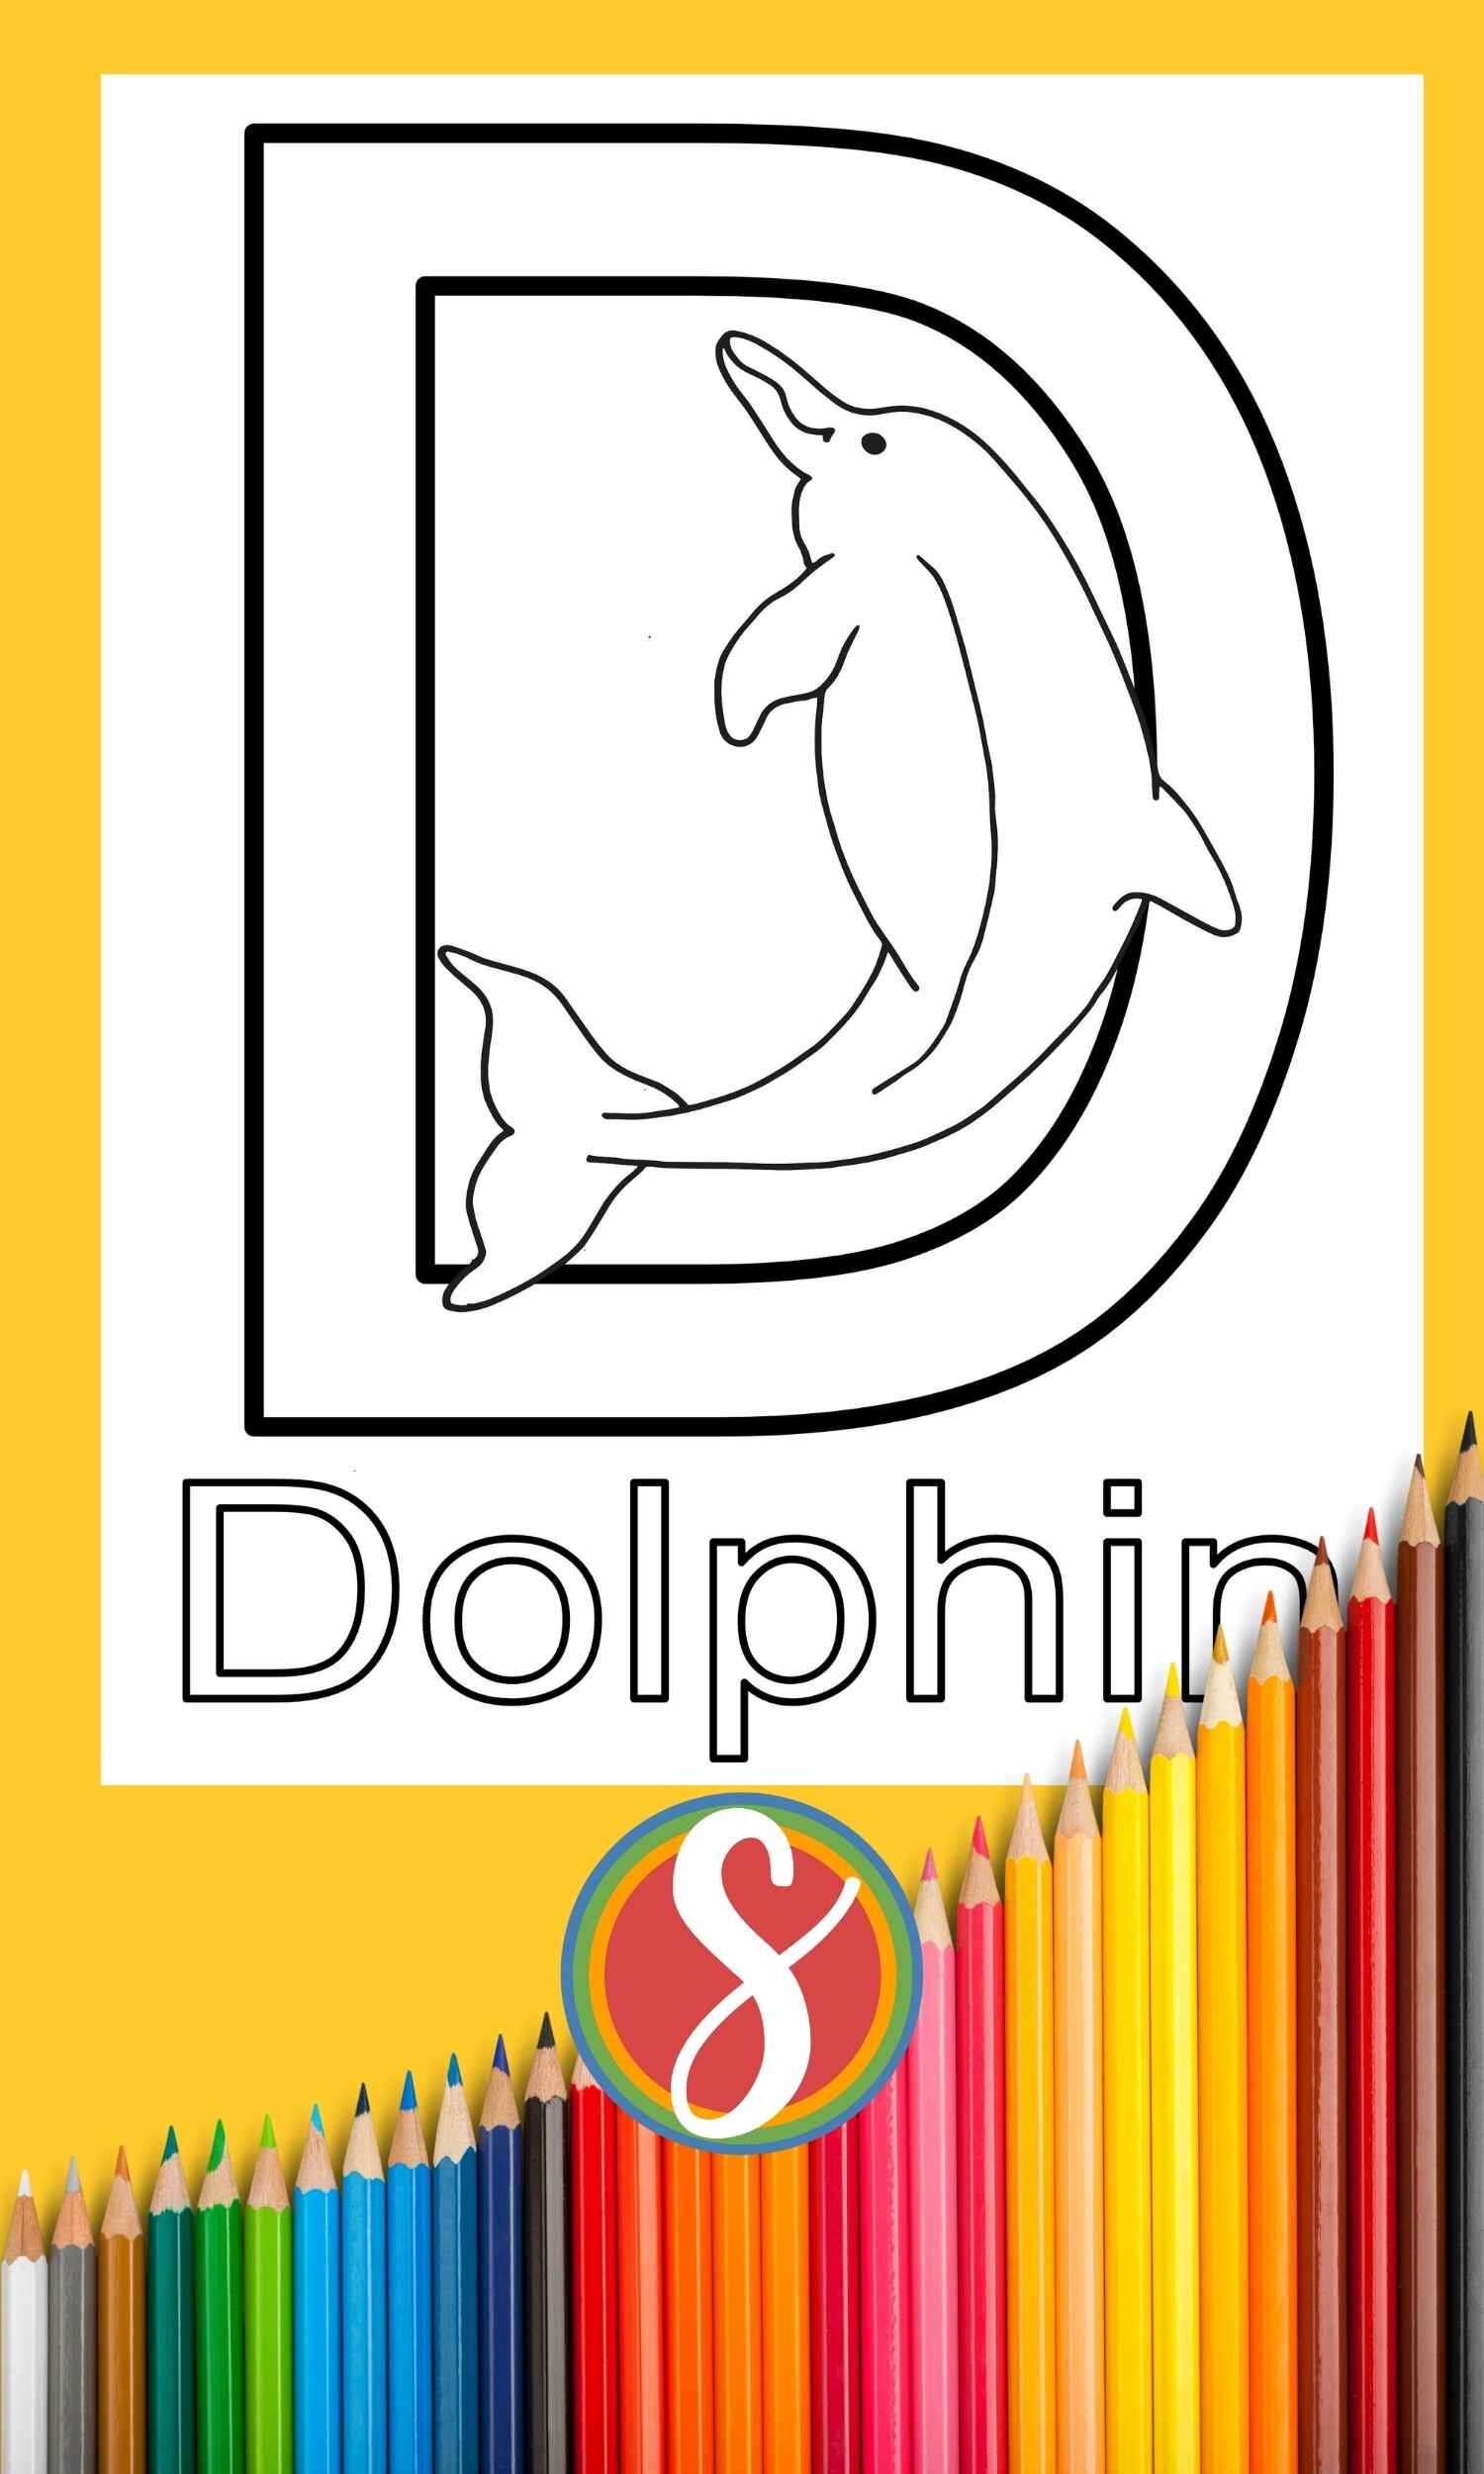 Free D is for Dolphin coloring page + 10 more free dolphin coloring sheets from Stevie Doodles